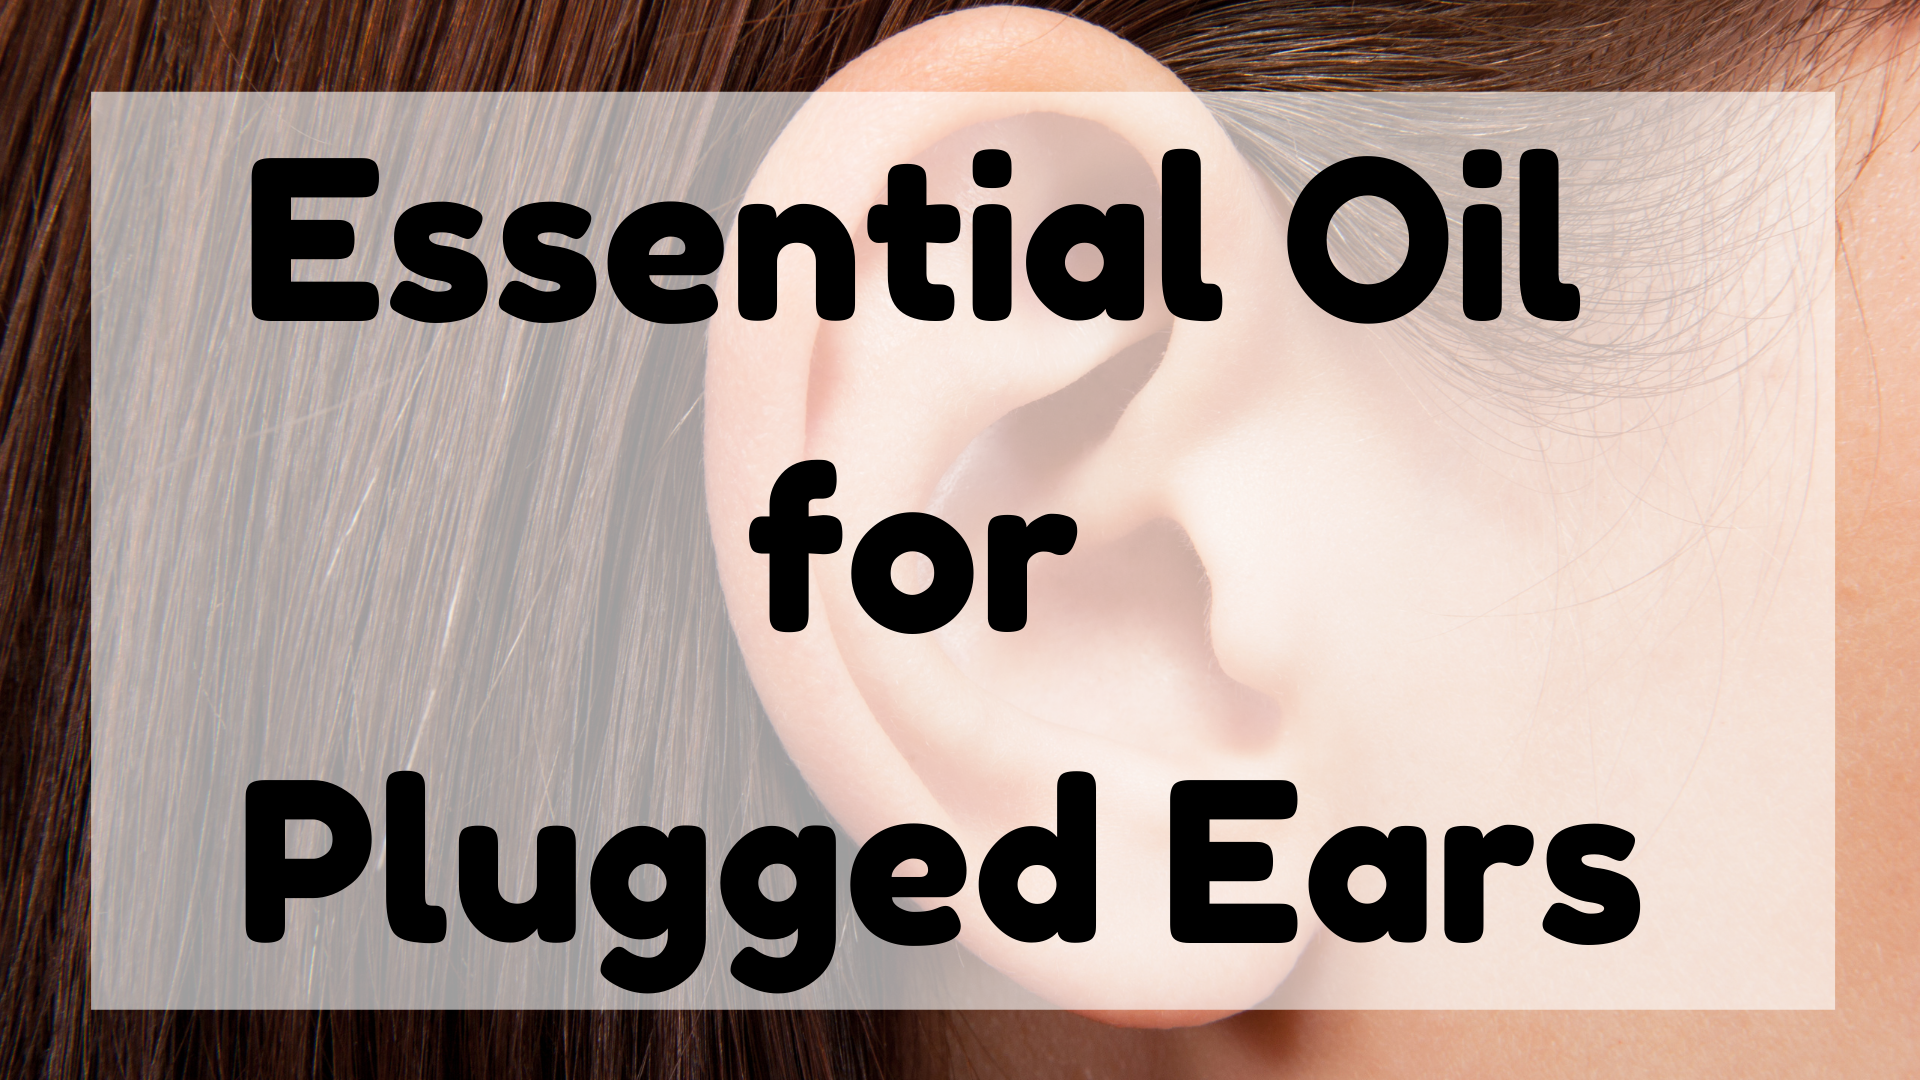 Essential Oil For Plugged Ears